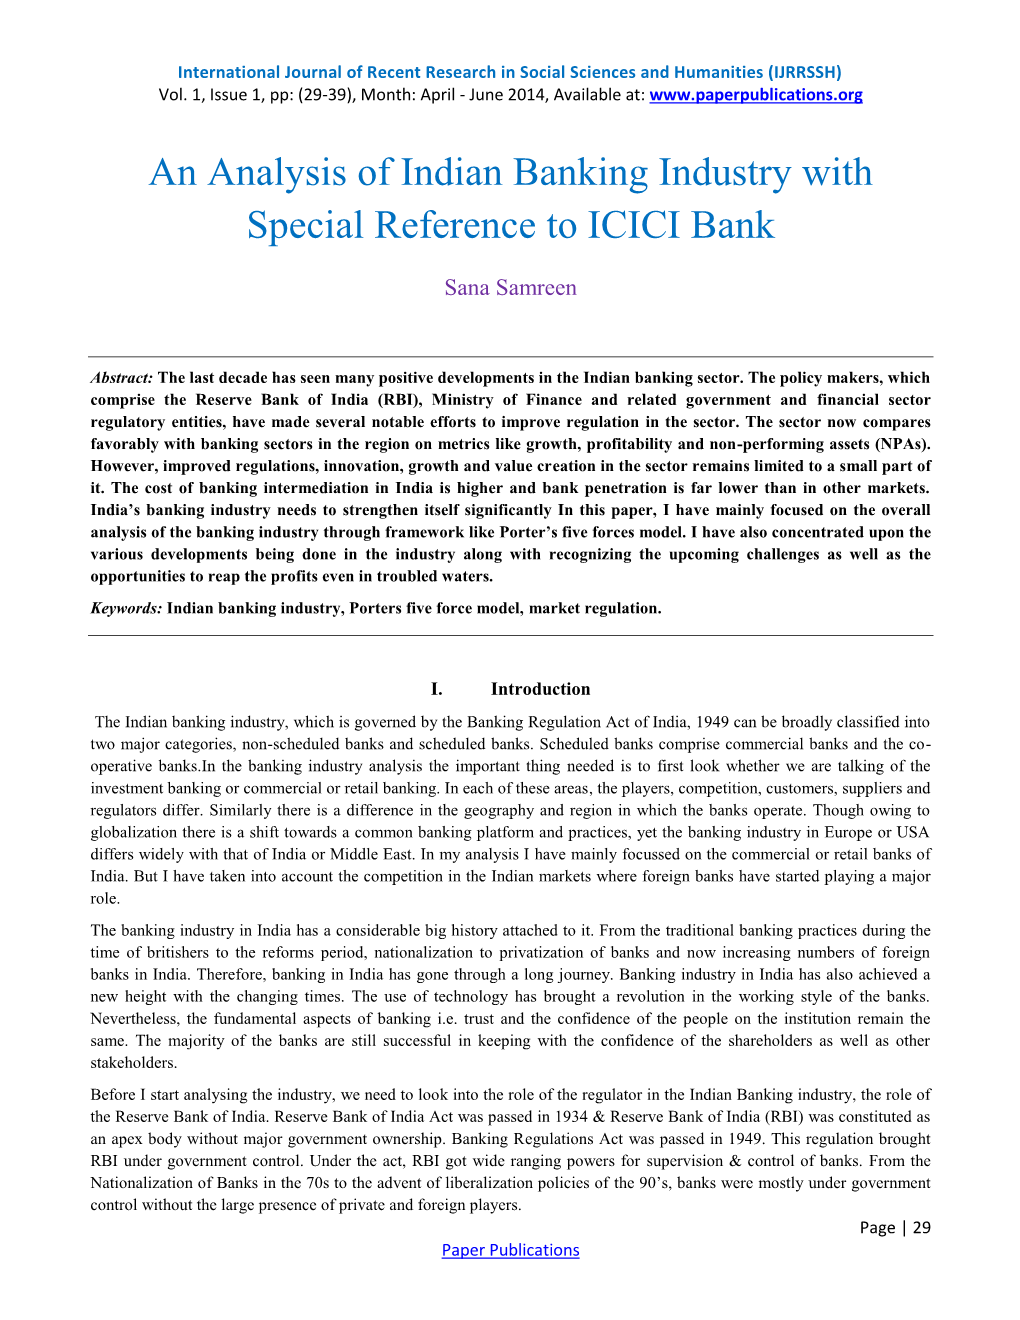 An Analysis of Indian Banking Industry with Special Reference to ICICI Bank